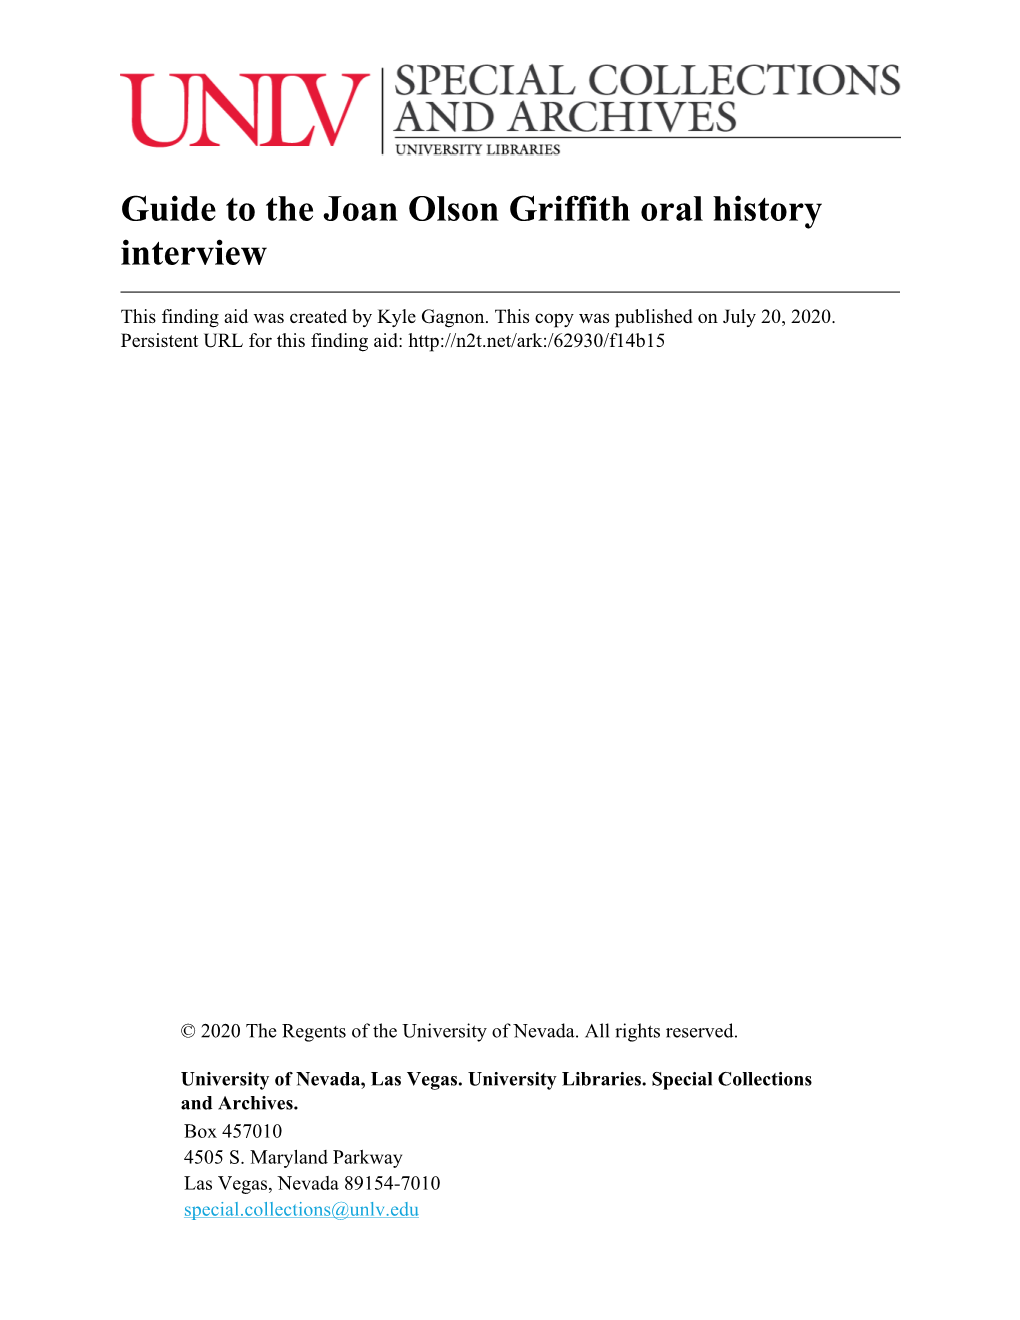 Guide to the Joan Olson Griffith Oral History Interview